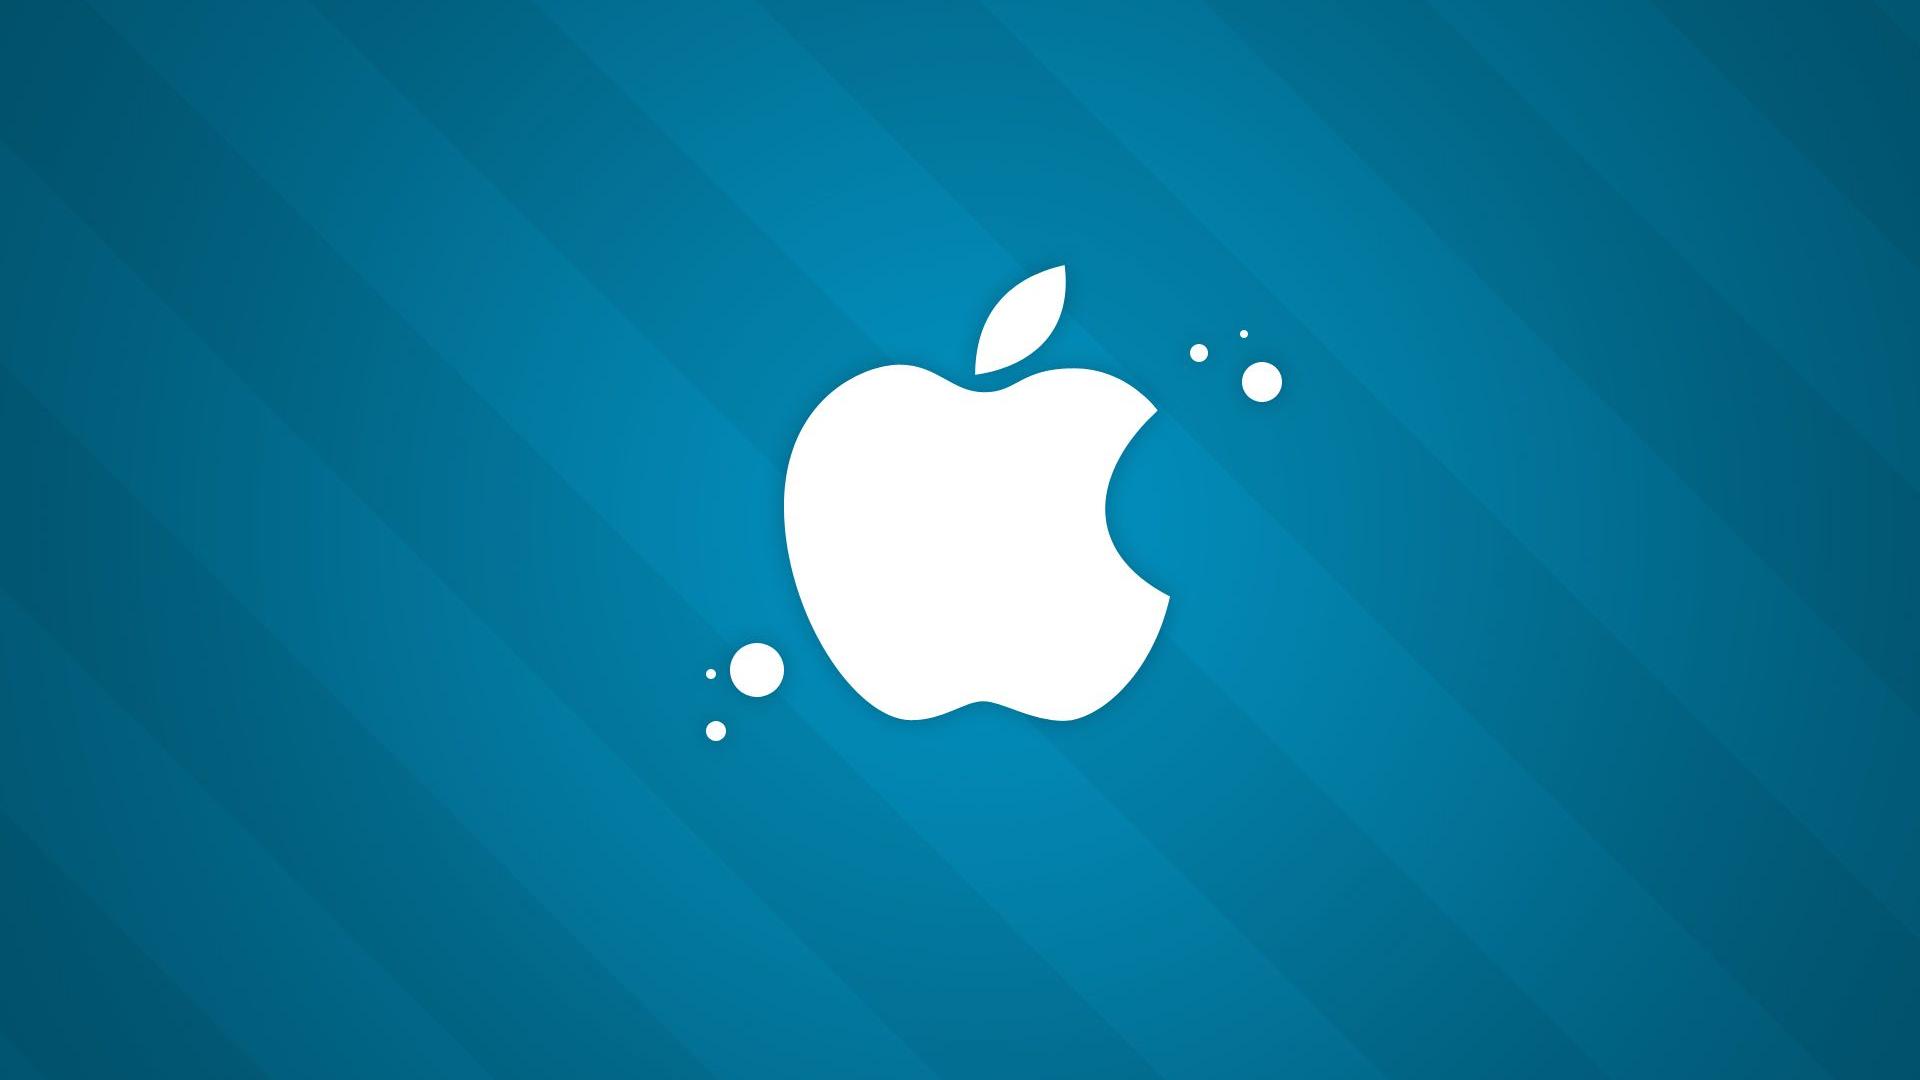 HD Apple Wallpapers 1080p 70 images